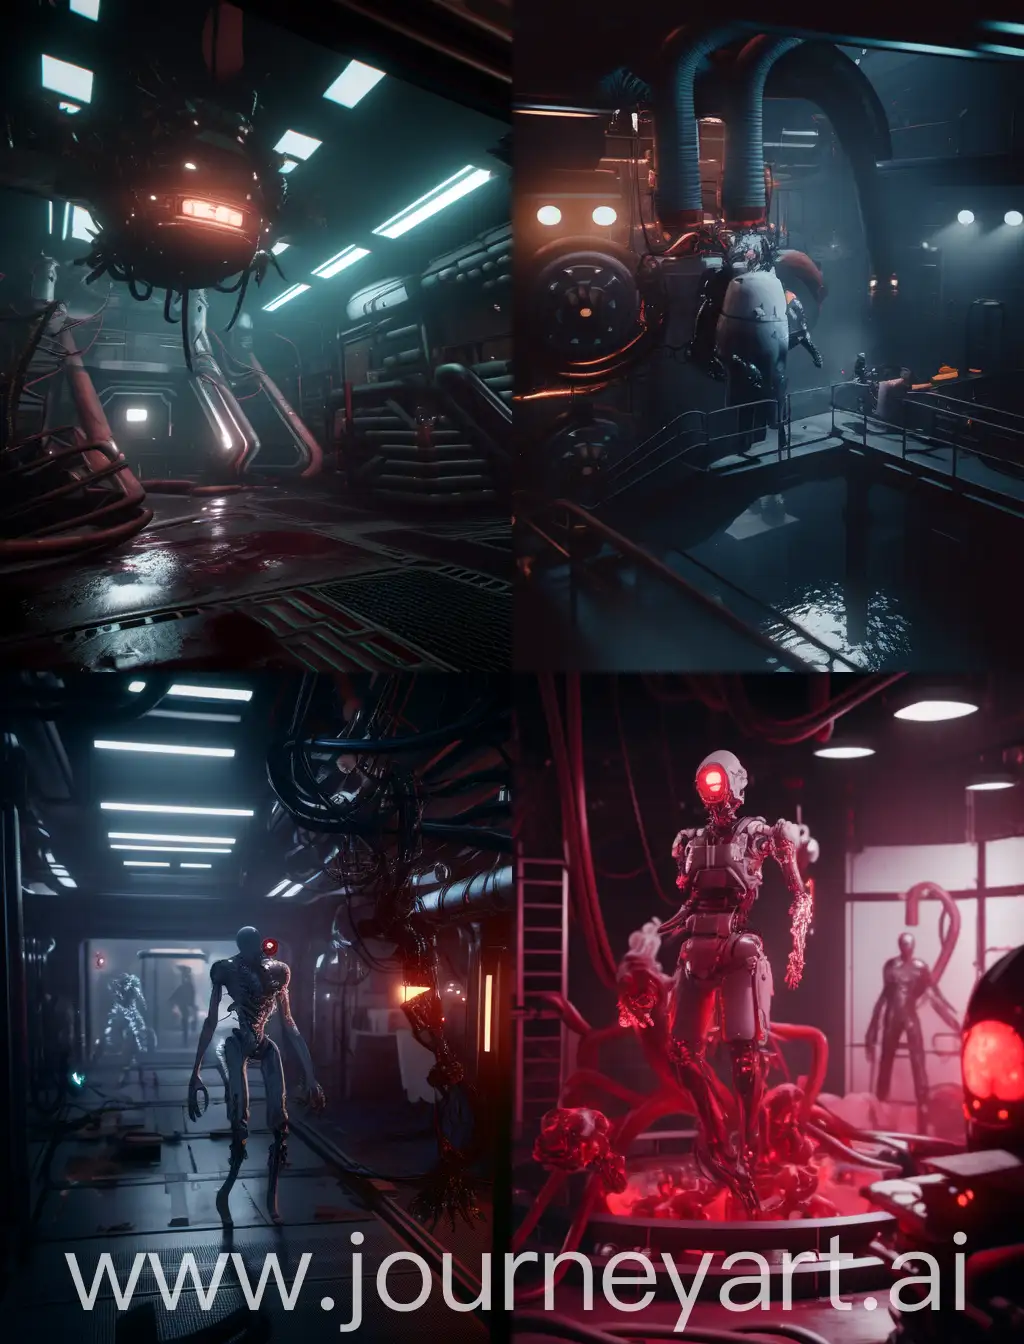 An avant garde horror scene set in a futuristic test factory. The floating simulation features a ghostly, blood-drenched figure with an anatomically raw appearance, embodying the Ghostcore and Bloodcore themes. The factory is filled with cryptid-like creatures, and the hyperrealistic, 8k visuals create a cinematic experience. The atmosphere is tense, with a mix of analog horror and sharp focus, evoking a sense of dread and unease., cinematic